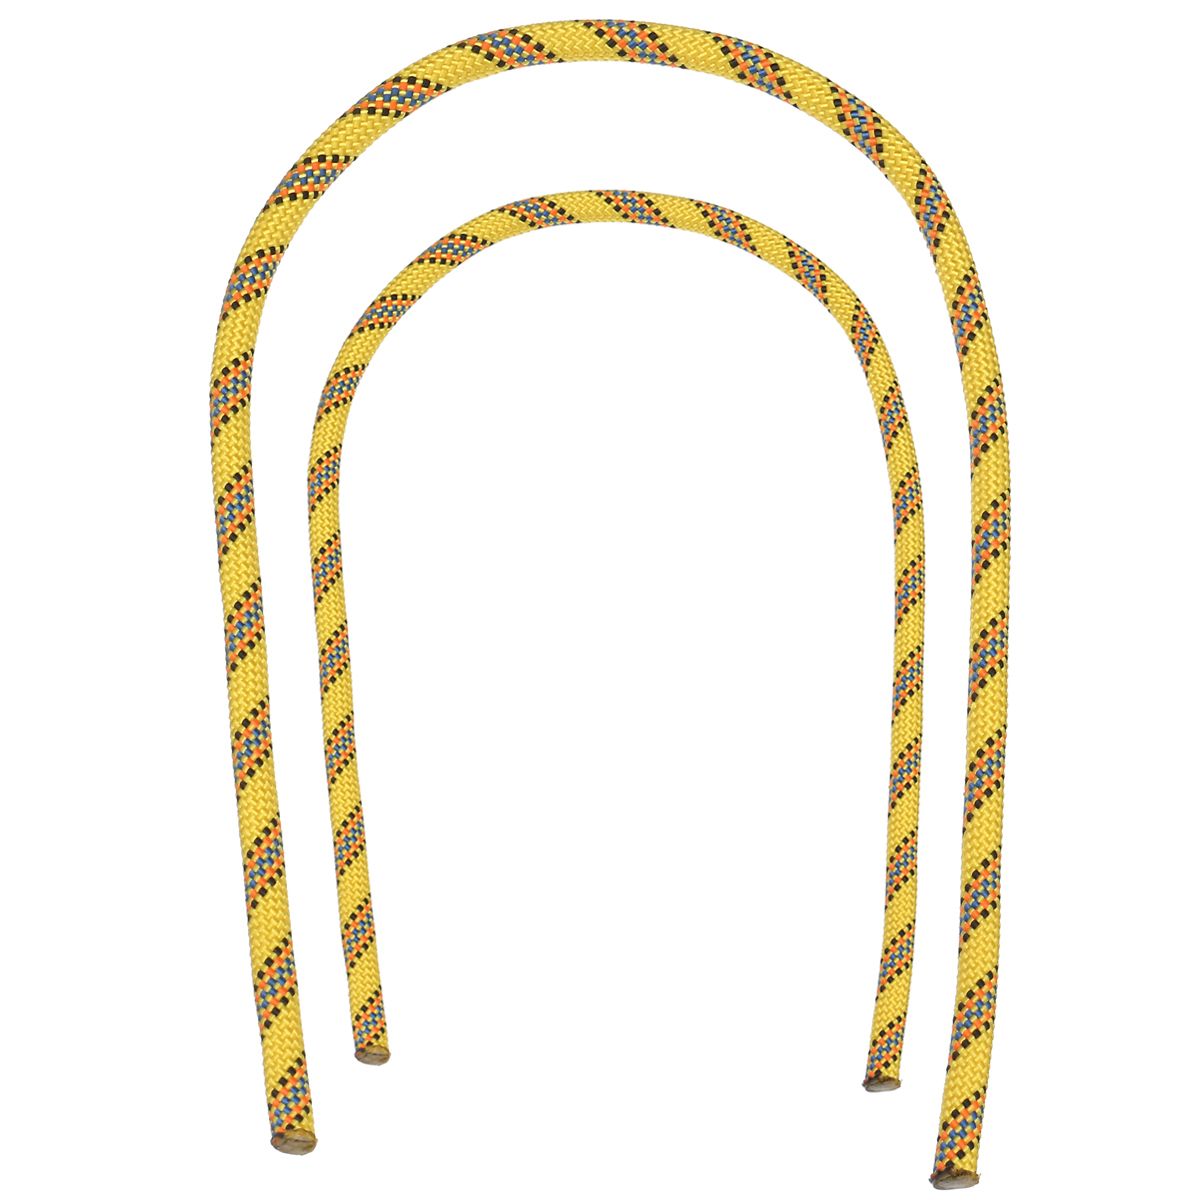 18inch24inch-8mm-Resistant-Prusik-Cord-Rope-Loop-Arborist-Rock-Climbing-Rescue-Caving-1443379